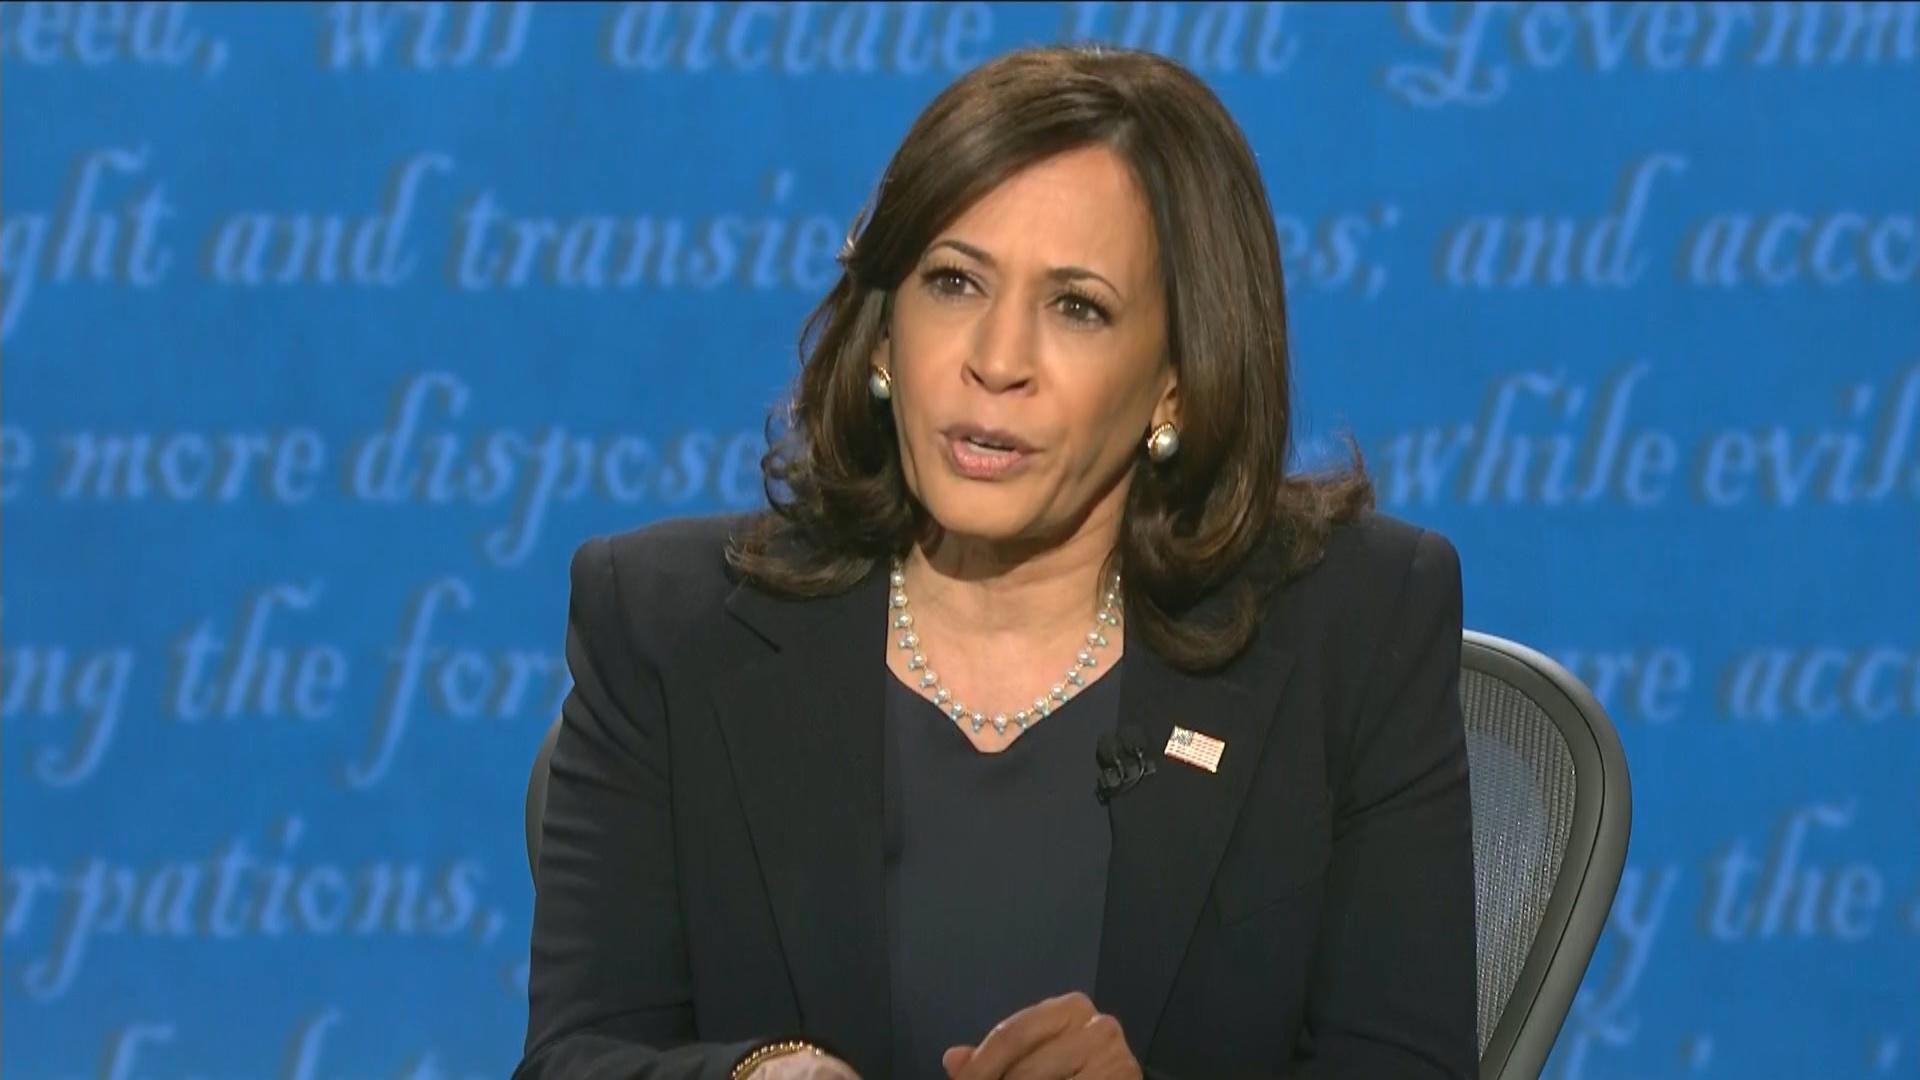 A file photo of Kamala Harris, who was sworn in Jan. 20, 2021 as vice president of the United States. (WTTW News via CNN)